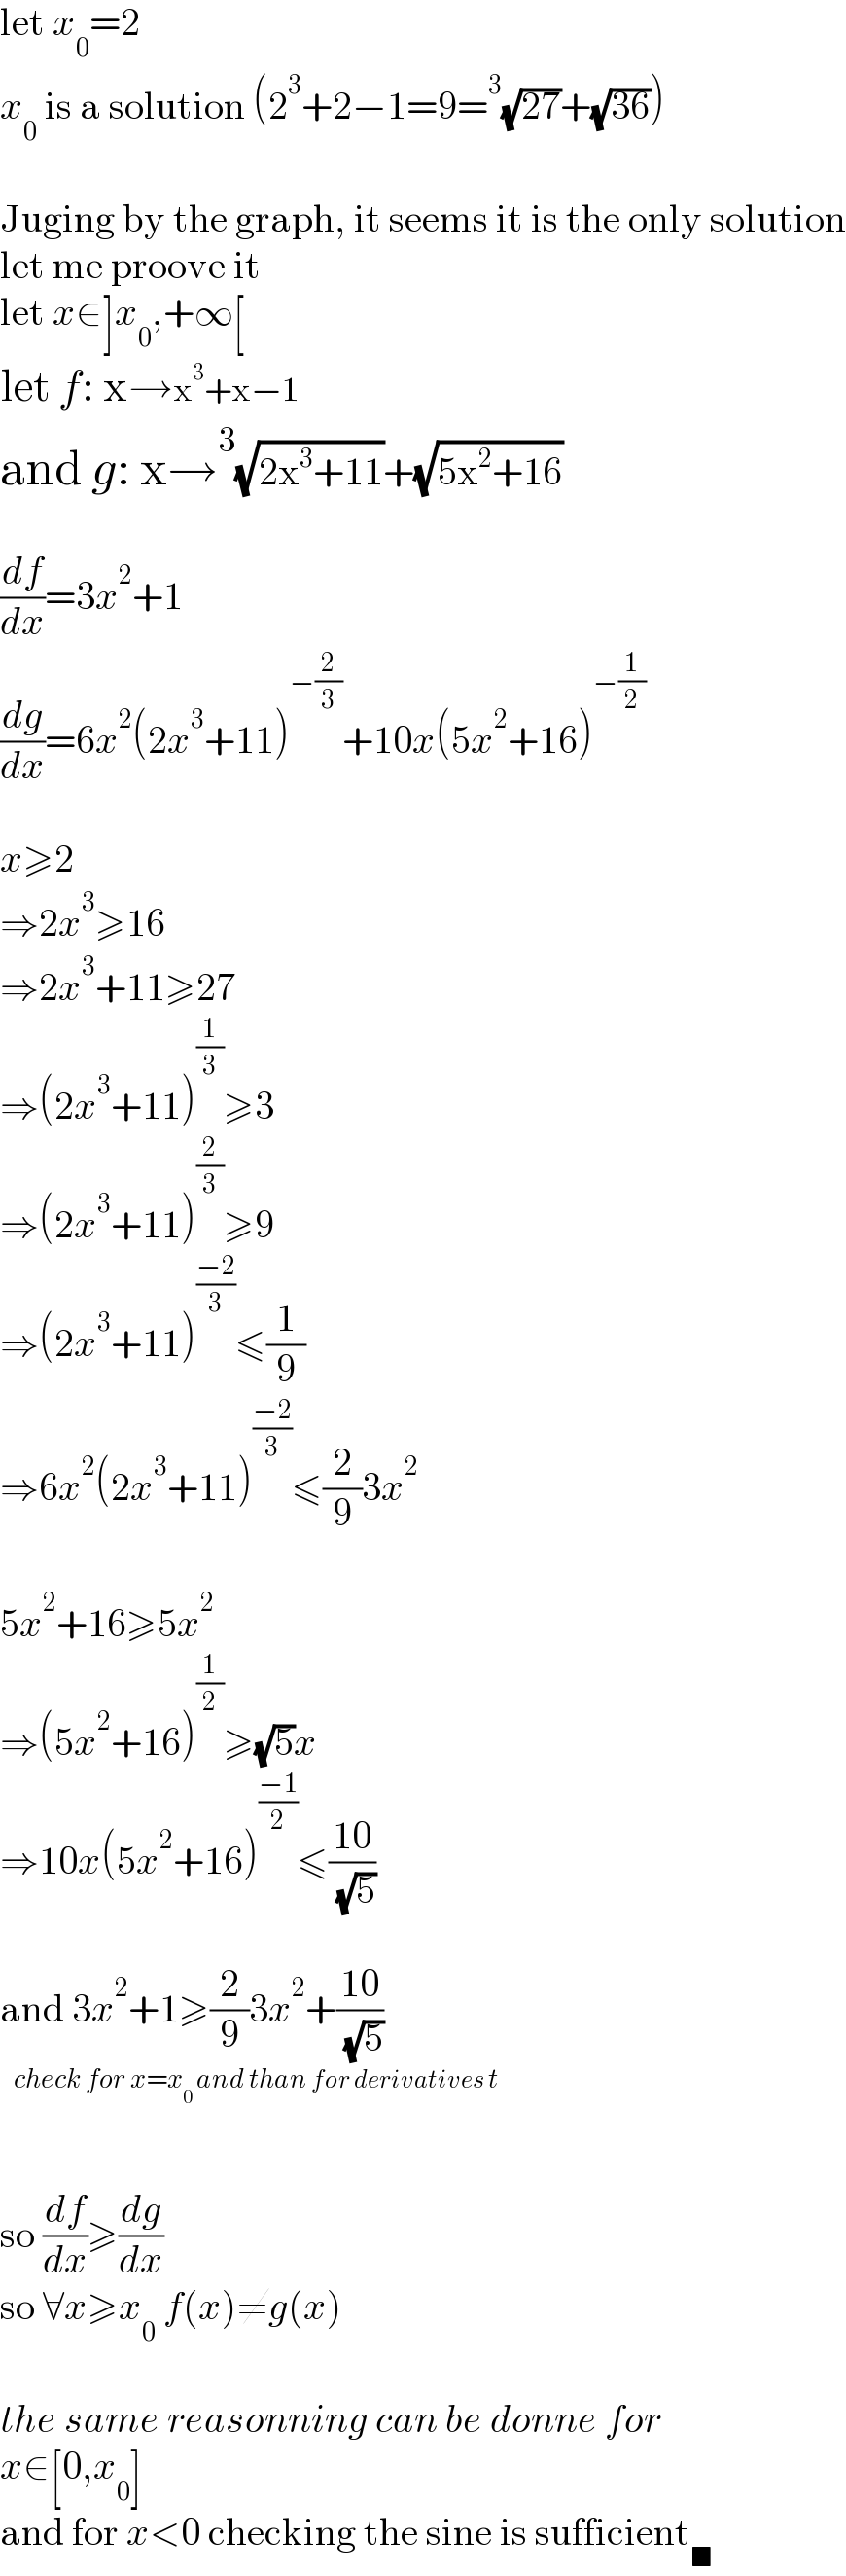 let x_0 =2  x_0  is a solution (2^3 +2−1=9=^3 (√(27))+(√(36)))    Juging by the graph, it seems it is the only solution  let me proove it  let x∈]x_0 ,+∞[  let f: x→x^3 +x−1  and g: x→^3 (√(2x^3 +11))+(√(5x^2 +16))    (df/dx)=3x^2 +1  (dg/dx)=6x^2 (2x^3 +11)^(−(2/3)) +10x(5x^2 +16)^(−(1/2))     x≥2  ⇒2x^3 ≥16  ⇒2x^3 +11≥27  ⇒(2x^3 +11)^(1/3) ≥3  ⇒(2x^3 +11)^(2/3) ≥9  ⇒(2x^3 +11)^((−2)/3) ≤(1/9)  ⇒6x^2 (2x^3 +11)^((−2)/3) ≤(2/9)3x^2     5x^2 +16≥5x^2   ⇒(5x^2 +16)^(1/2) ≥(√5)x  ⇒10x(5x^2 +16)^((−1)/2) ≤((10)/( (√5)))    and 3x^2 +1≥(2/9)3x^2 +((10)/( (√5)))      so (df/dx)≥(dg/dx)   so ∀x≥x_0  f(x)≠g(x)    the same reasonning can be donne for  x∈[0,x_0 ]  and for x<0 checking the sine is sufficient_■   